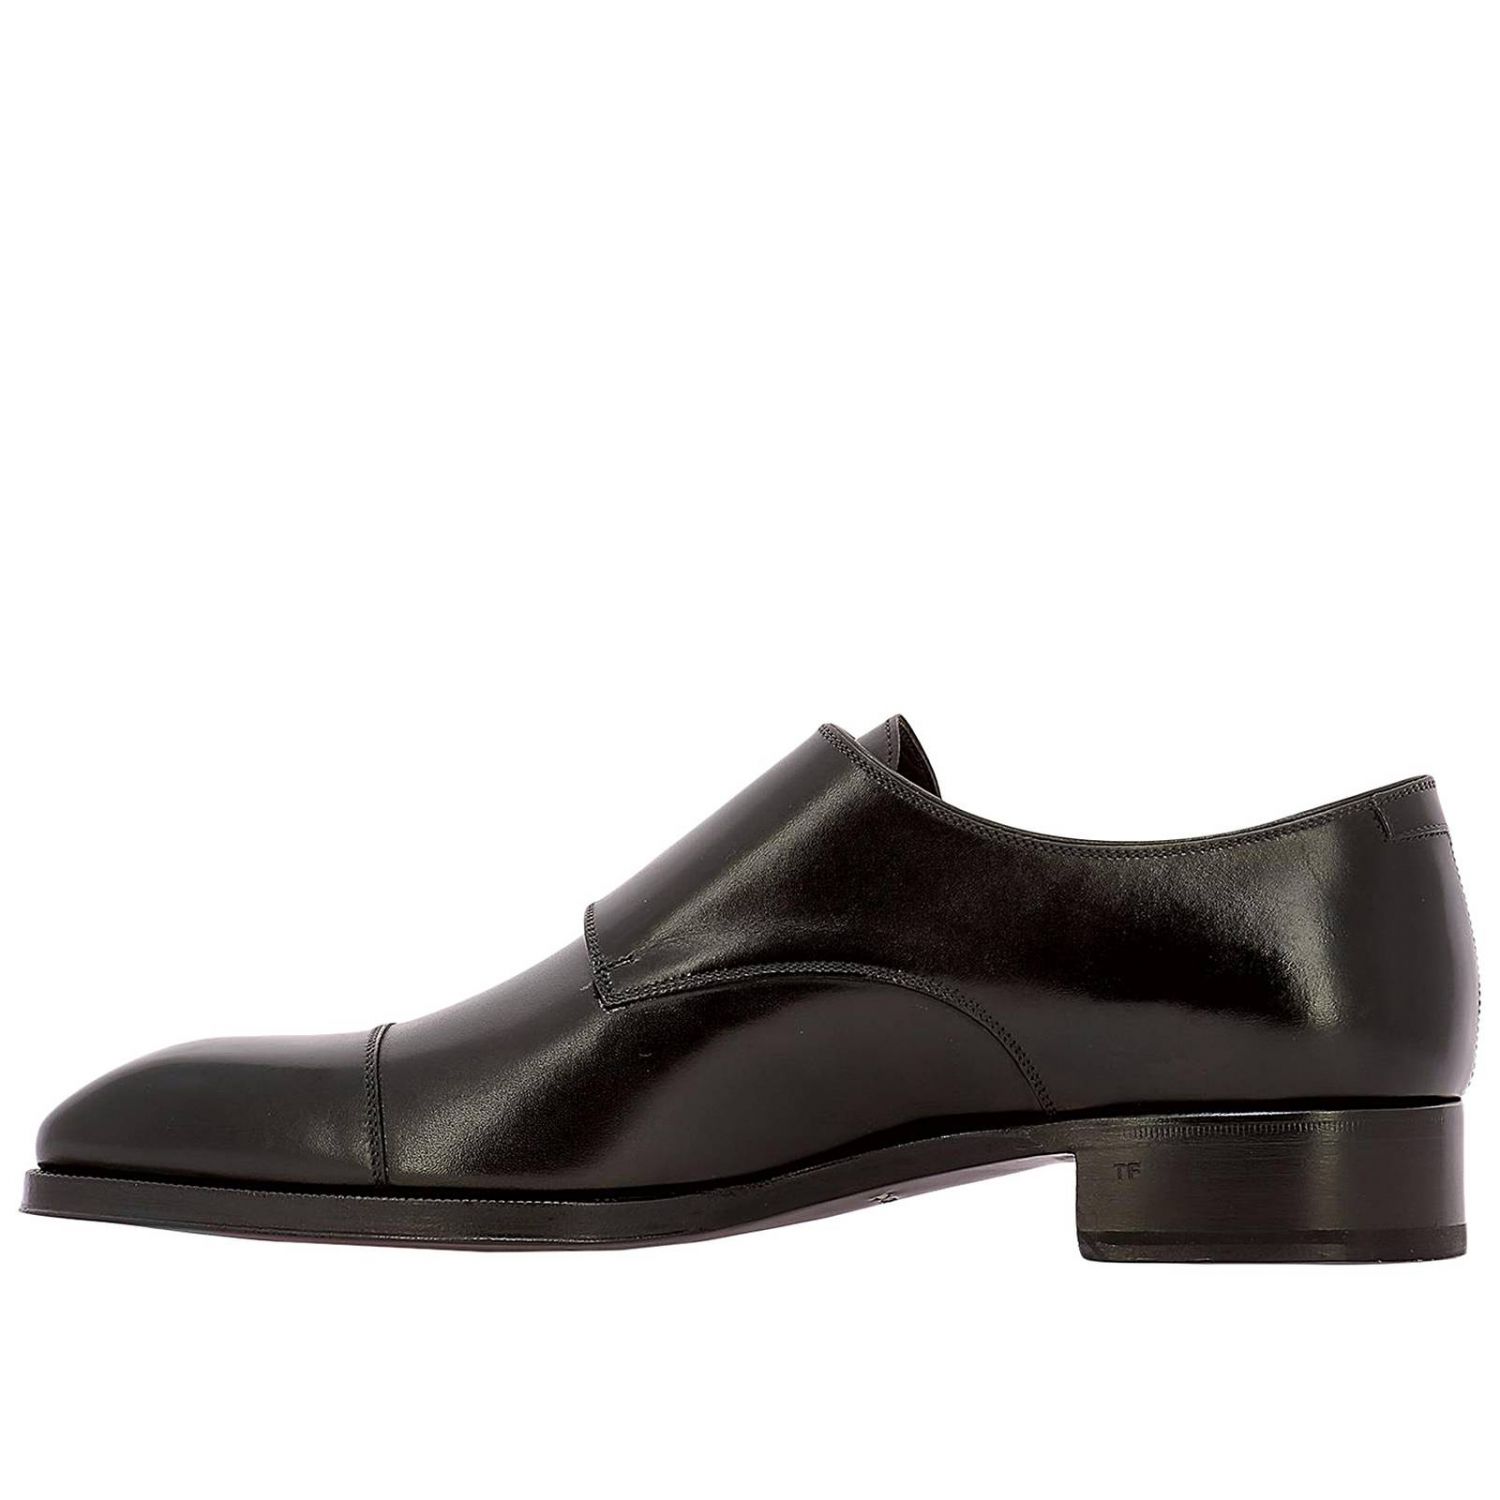 Tom Ford Outlet: Loafers men - Brown | Loafers Tom Ford J1127T BET ...